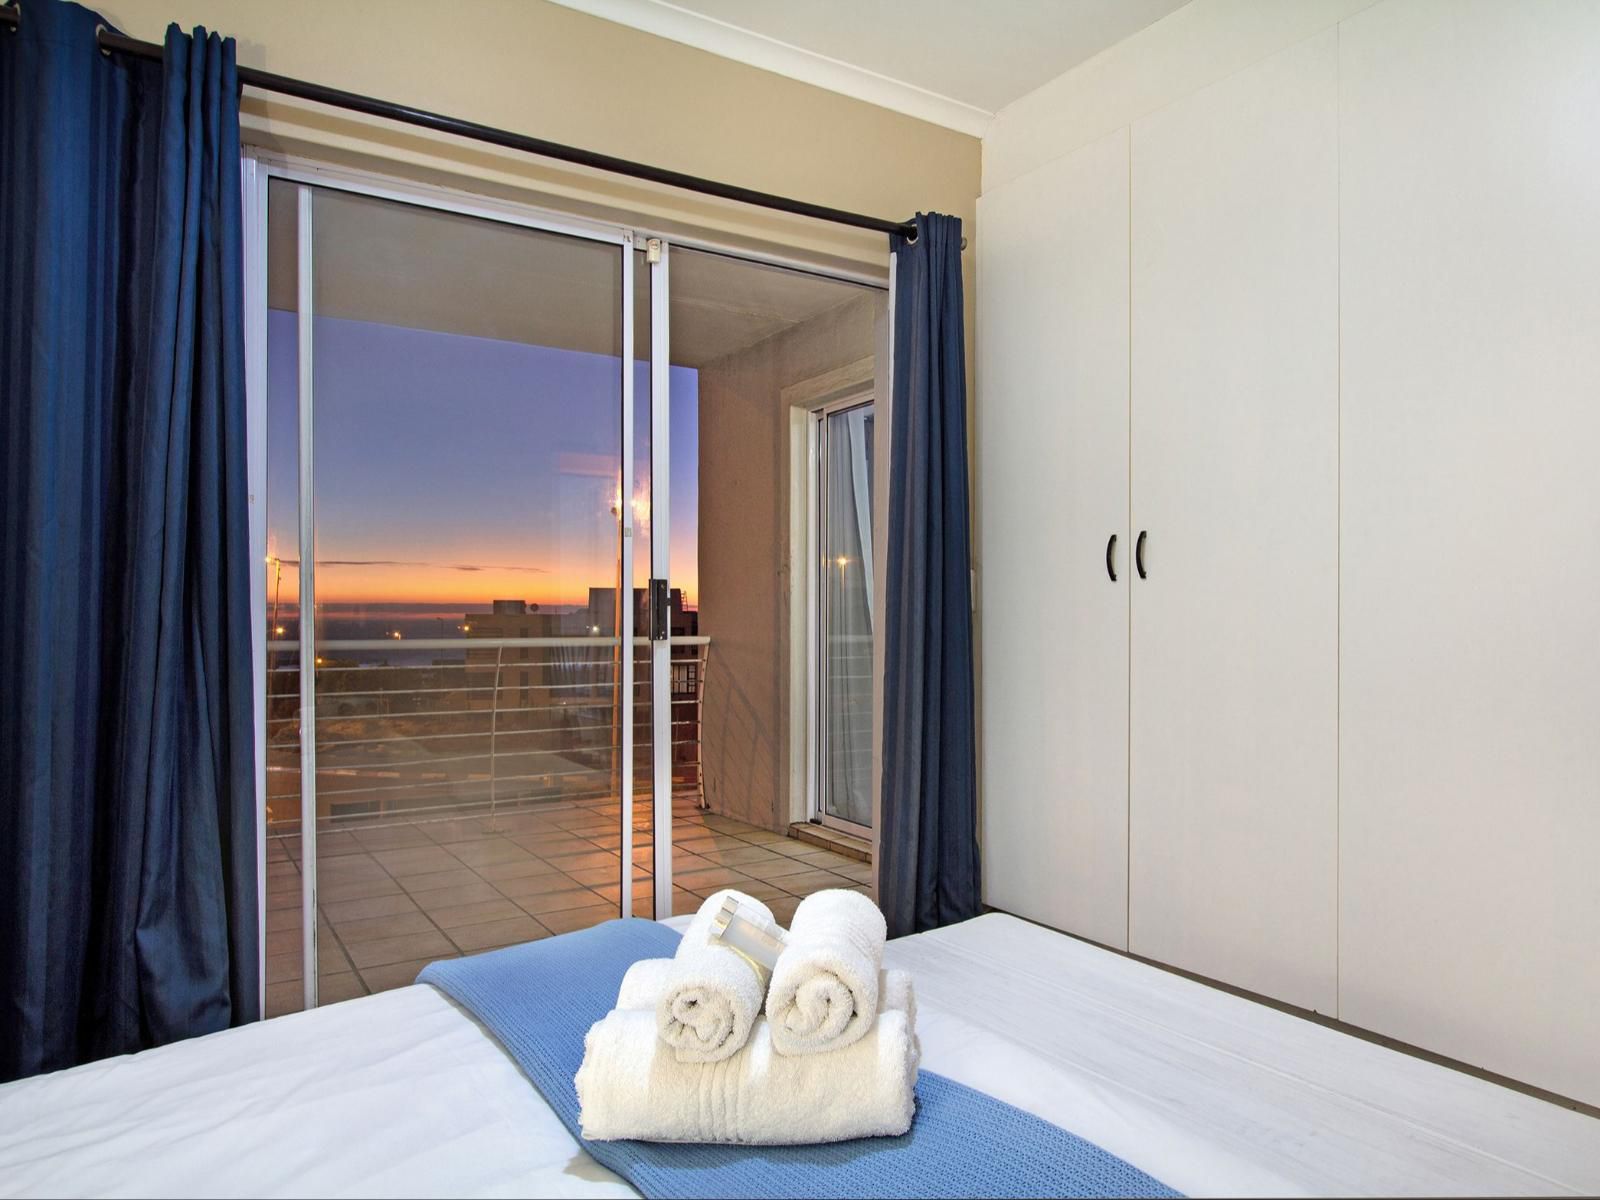 Dolphin Ridge 108 By Hostagents Bloubergstrand Blouberg Western Cape South Africa Bedroom